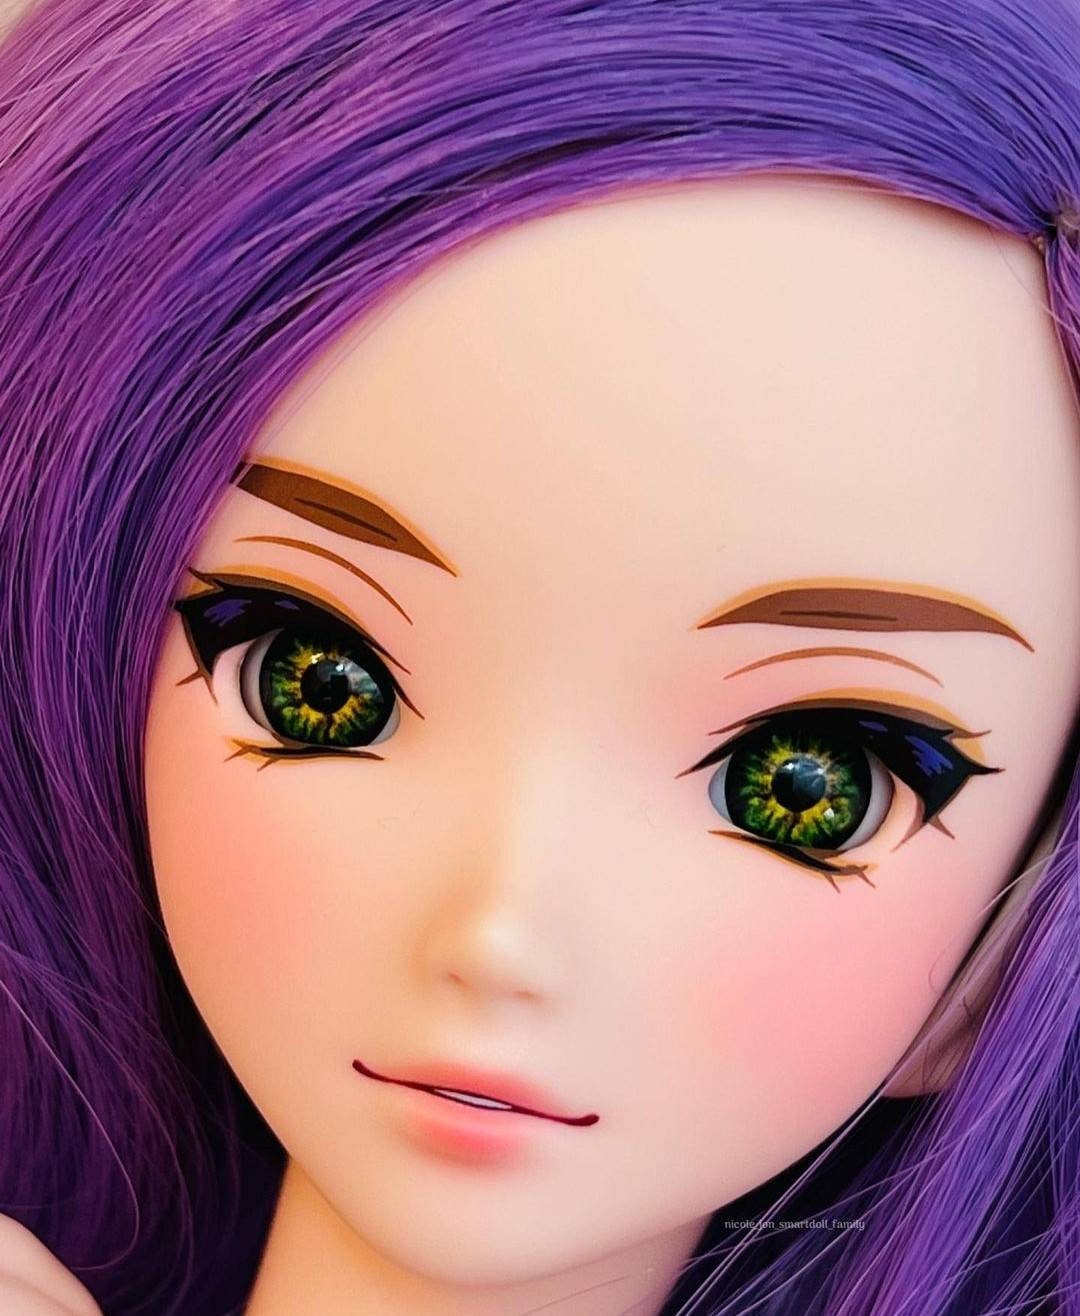 Natural Smart Doll Eyes , realistic doll eyes, doll eyes replacement, 14mm Fit BJD, SD Semireal Doll and similar Topaz Green